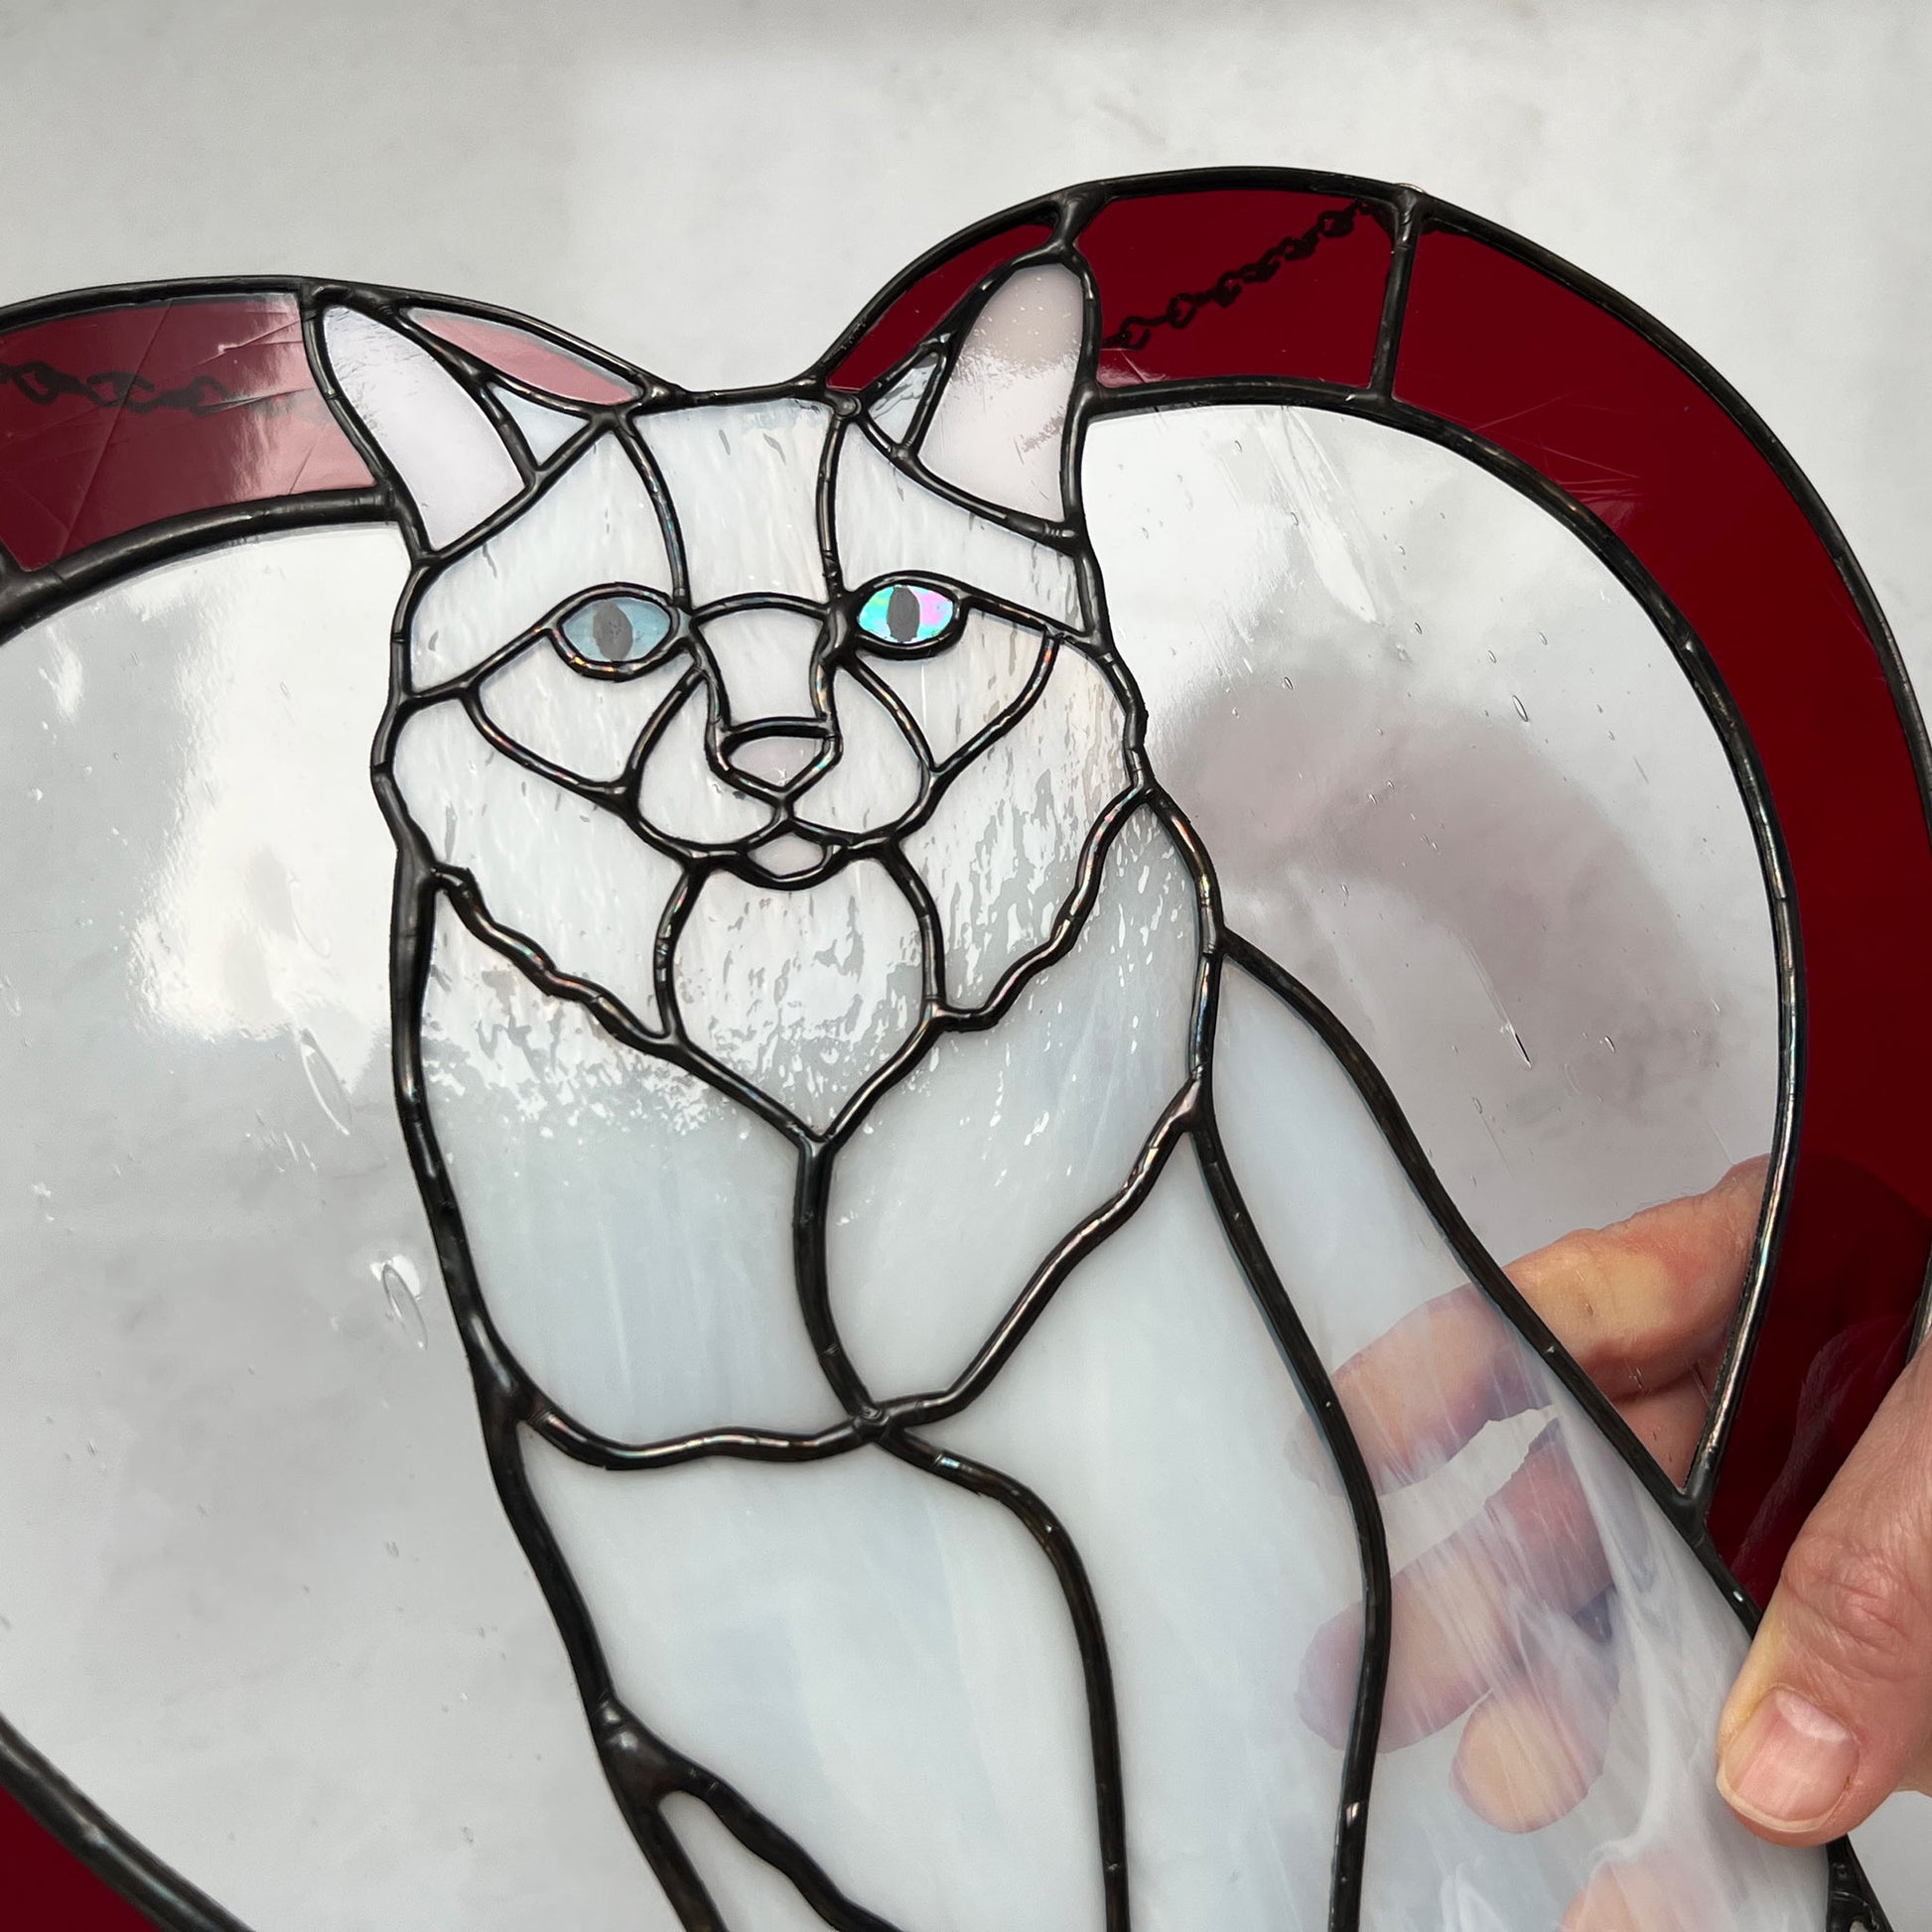 An all white stained glass sitting cat surrounded by a red heart. The glass used for the white fur is textured to resemble real fur and the eyes are an iridescent blue.  Light pink is used for the inner ear and the nose. A clear rainy glass is used between the cat and the heart for stability. This picture shows a hand holding the cat so you can get a sense of the size.